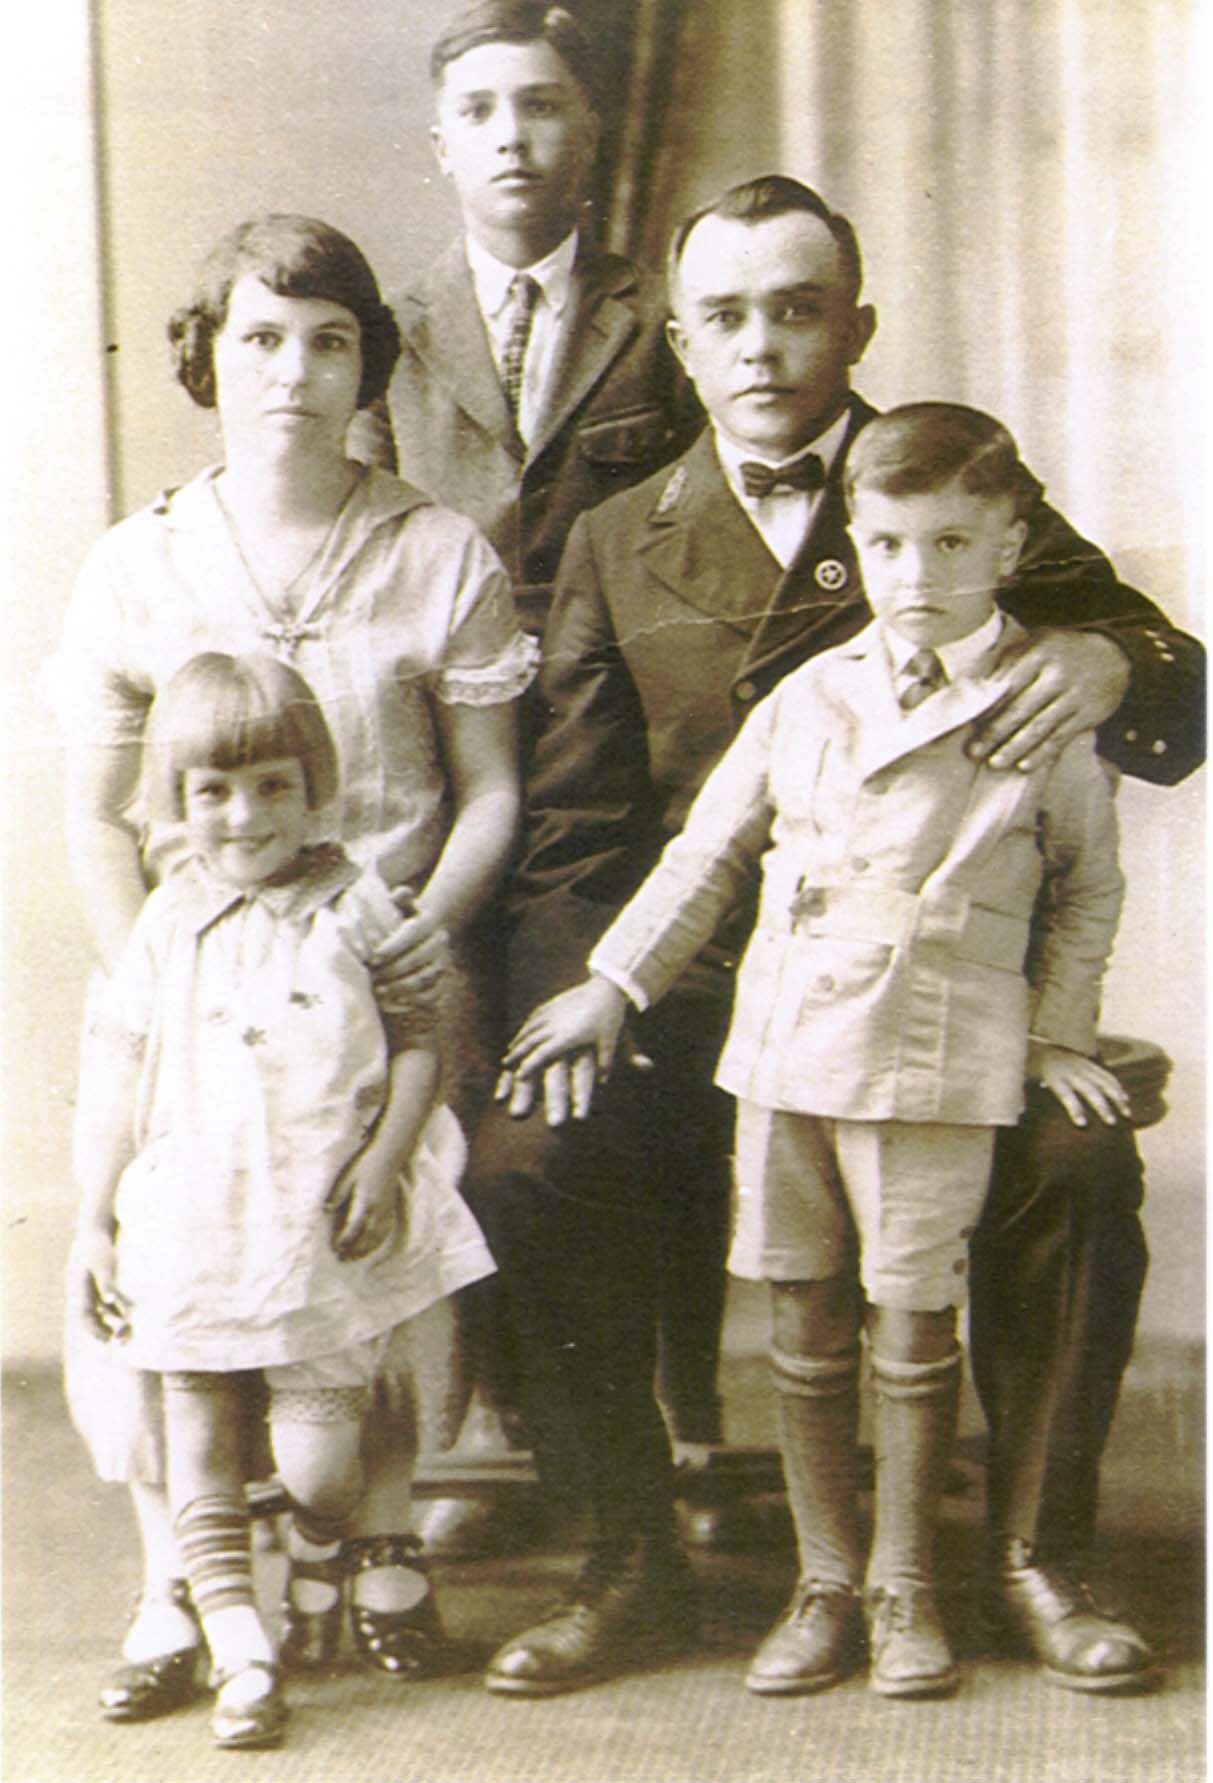 Photo of Hawaiian Manuel Ferreira in uniform posing with his family in 1926. (Lighthouse Digest Magazine)